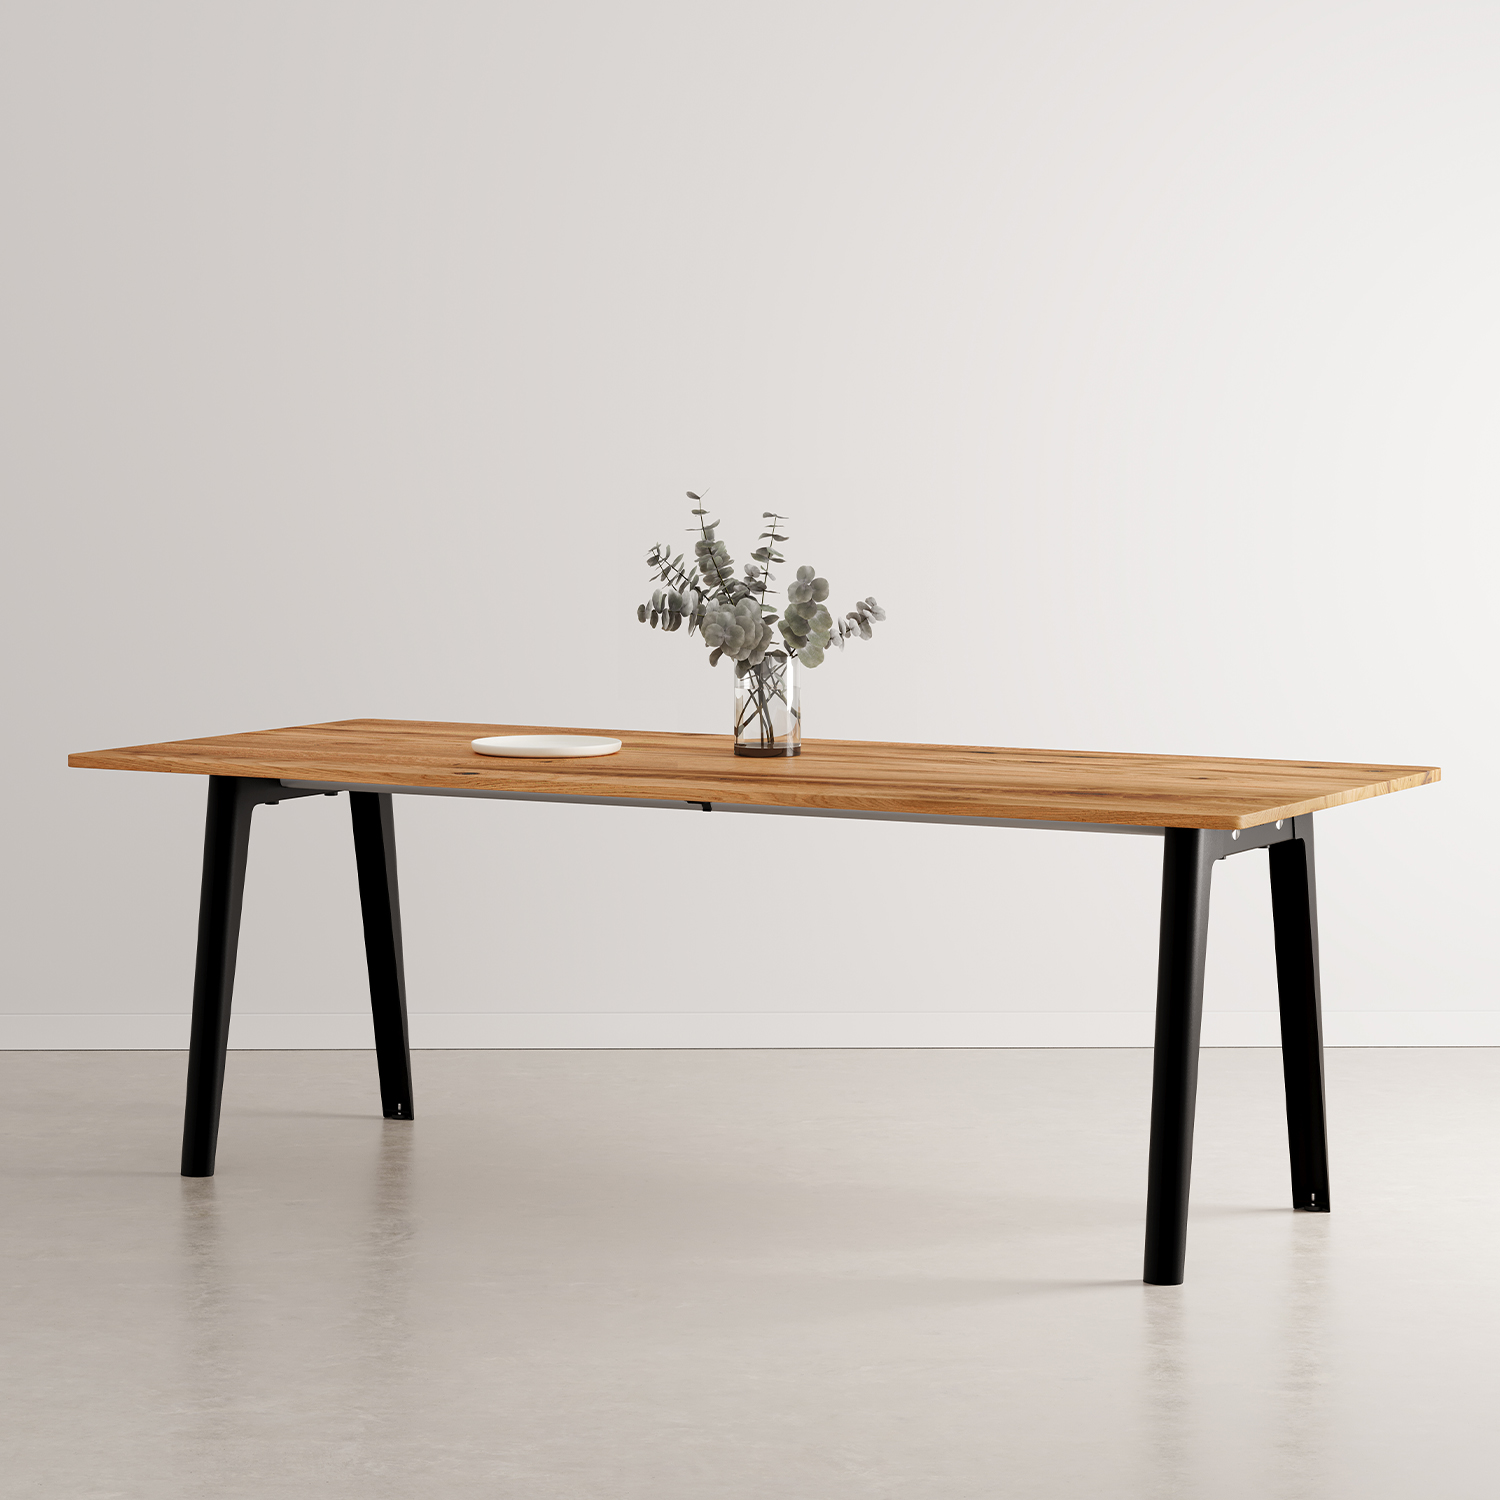 NEW MODERN dining table – reclaimed wood